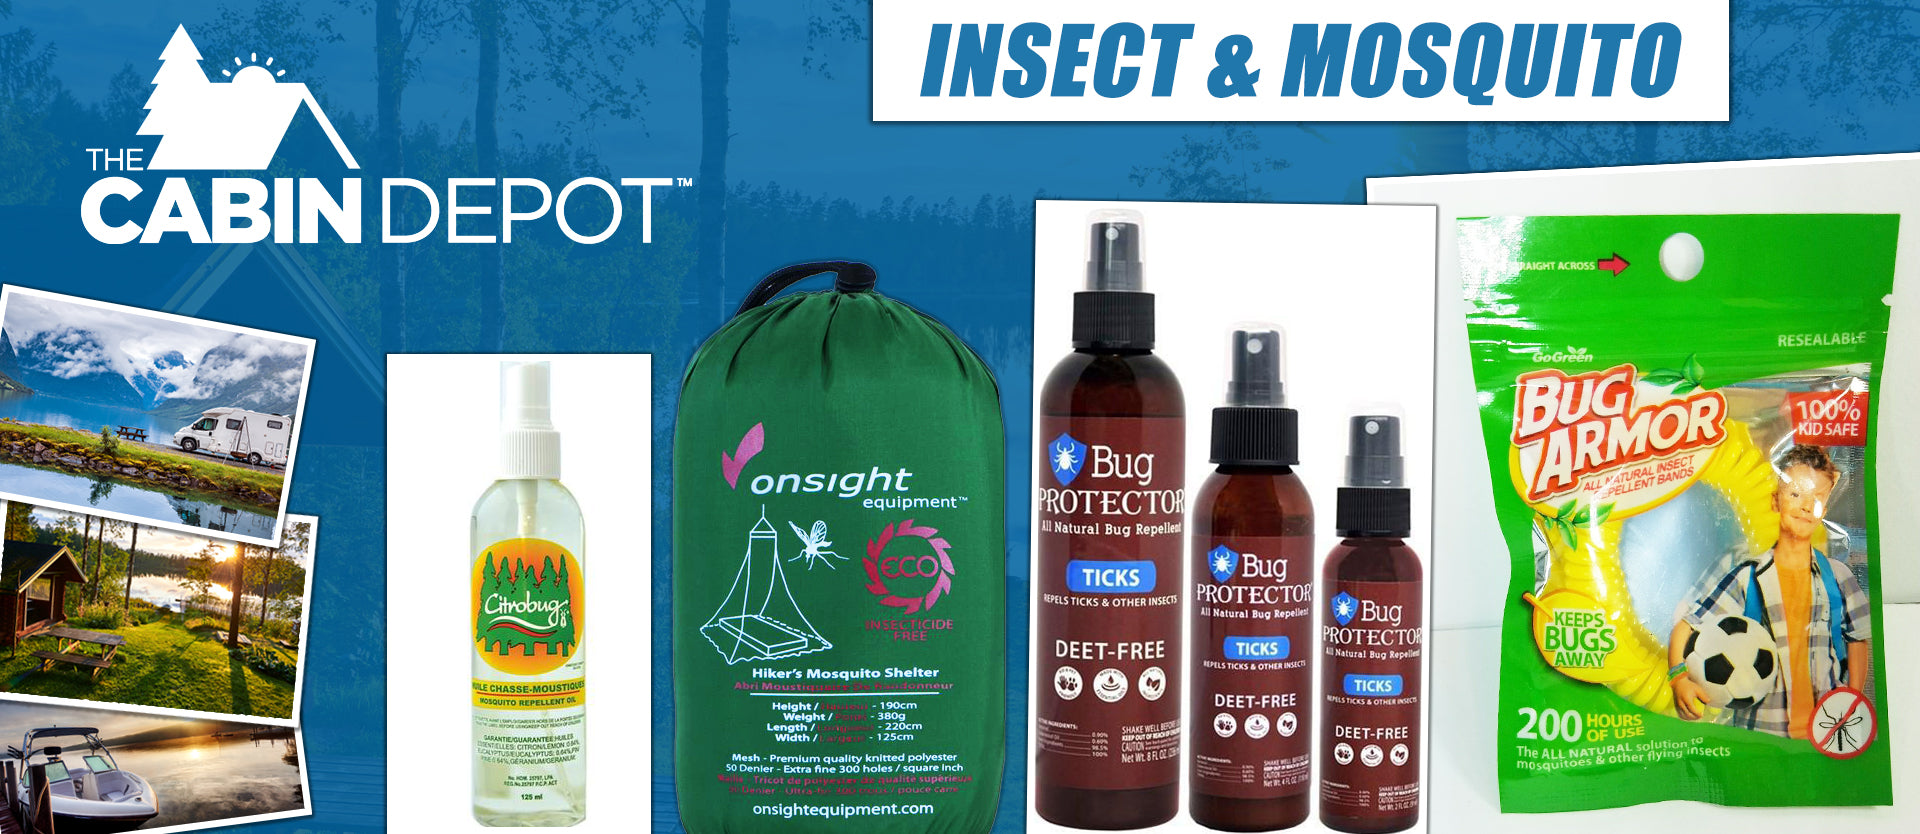 Mosquito Insect Control The Cabin Depot™